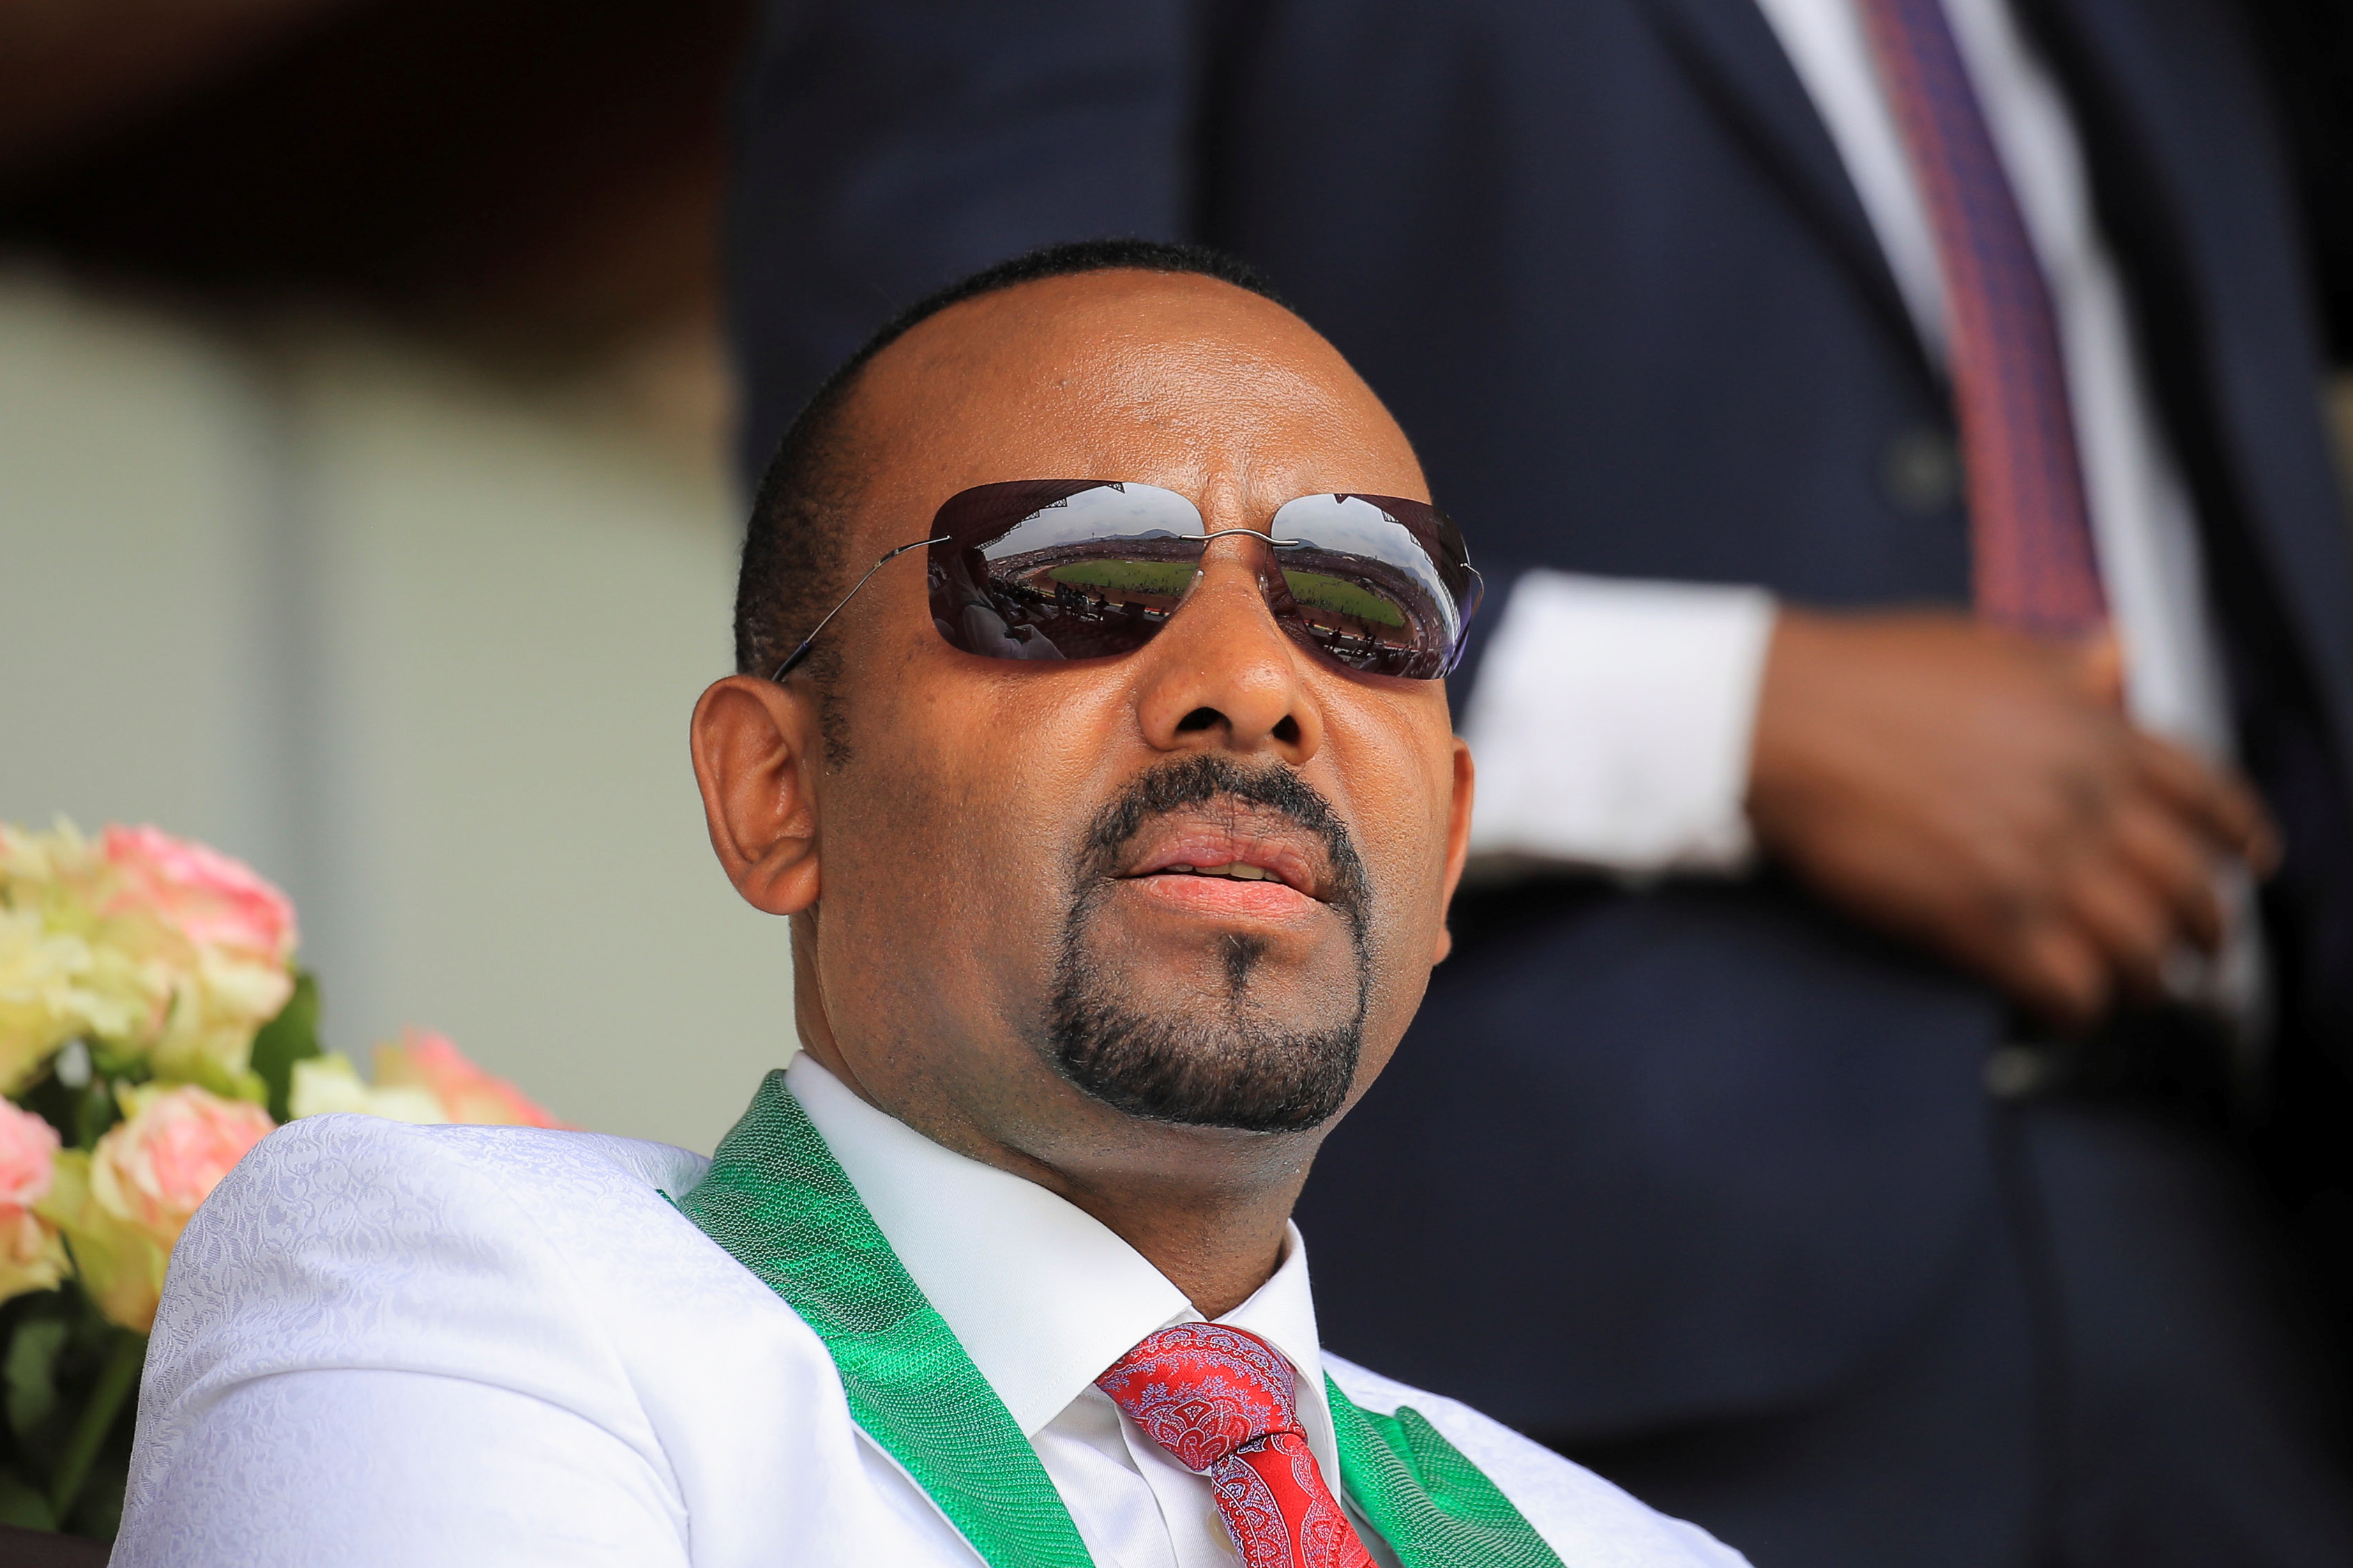 Ethiopian Prime Minister Abiy Ahmed attends his last campaign event ahead of Ethiopia's parliamentary and regional elections scheduled for June 21, in Jimma, Ethiopia, June 16, 2021. REUTERS/Tiksa Negeri